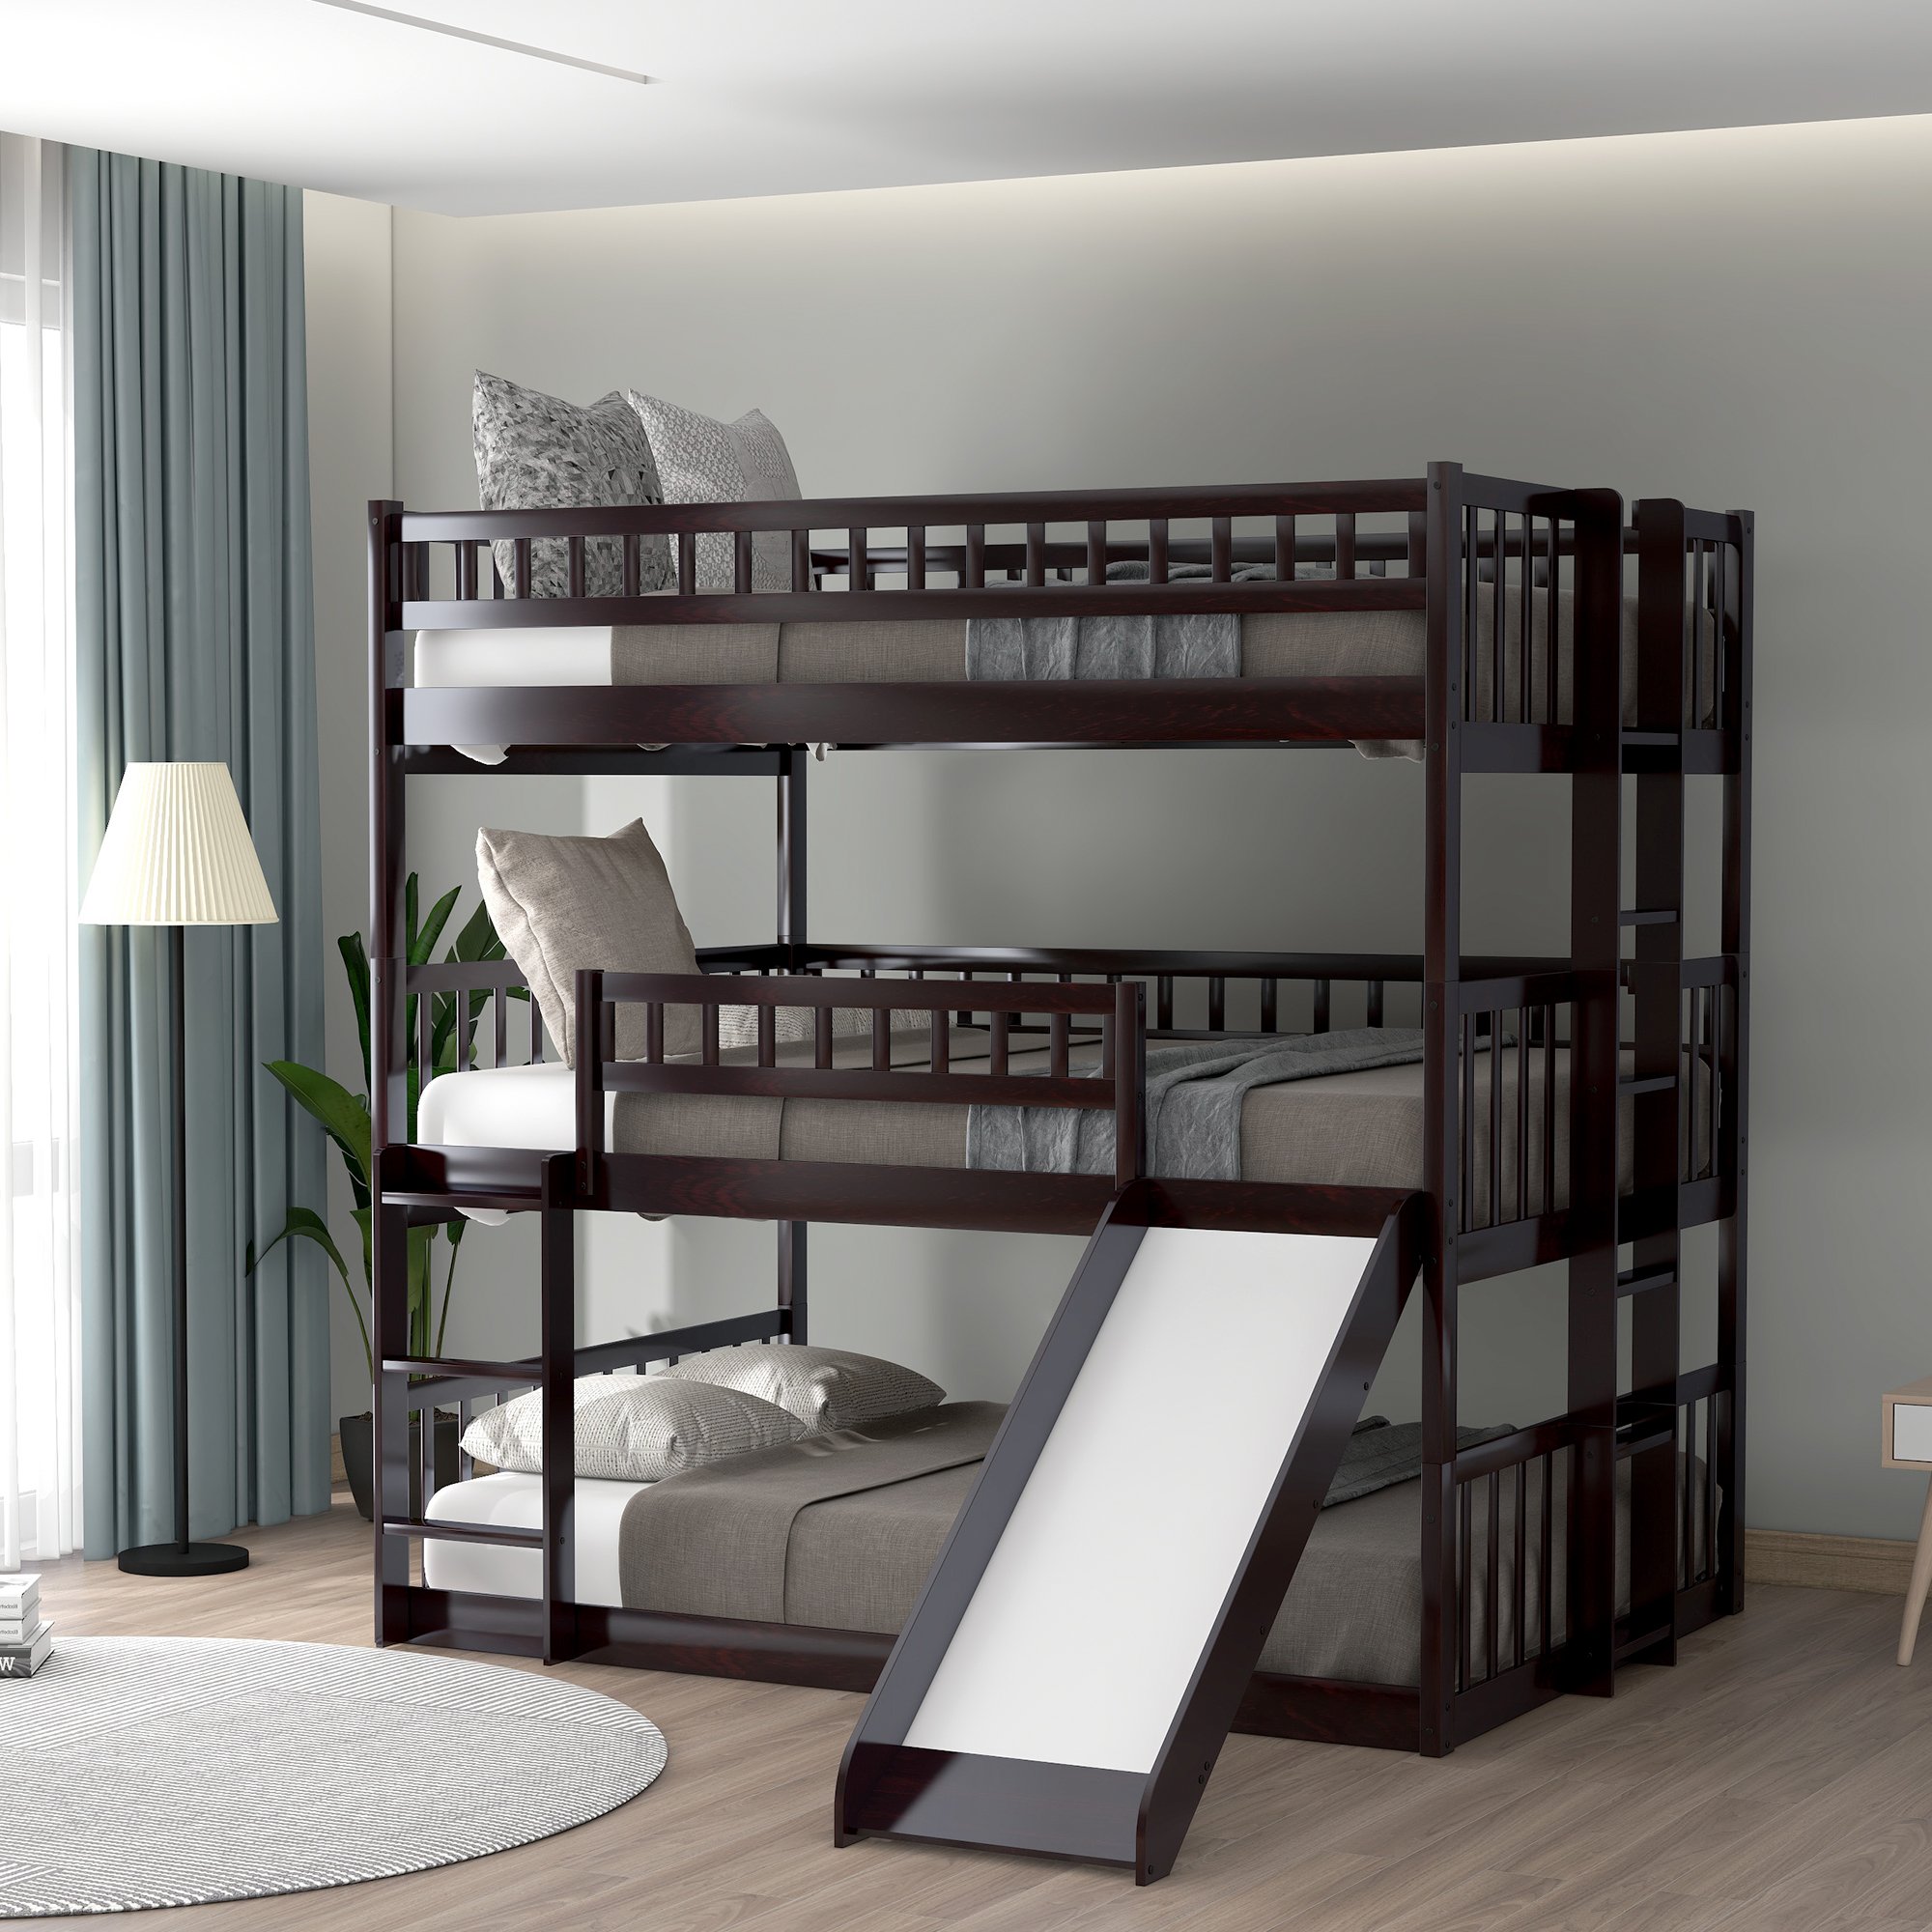 Full Over Triple Bunk, Triple Bunk Bed Pull Out